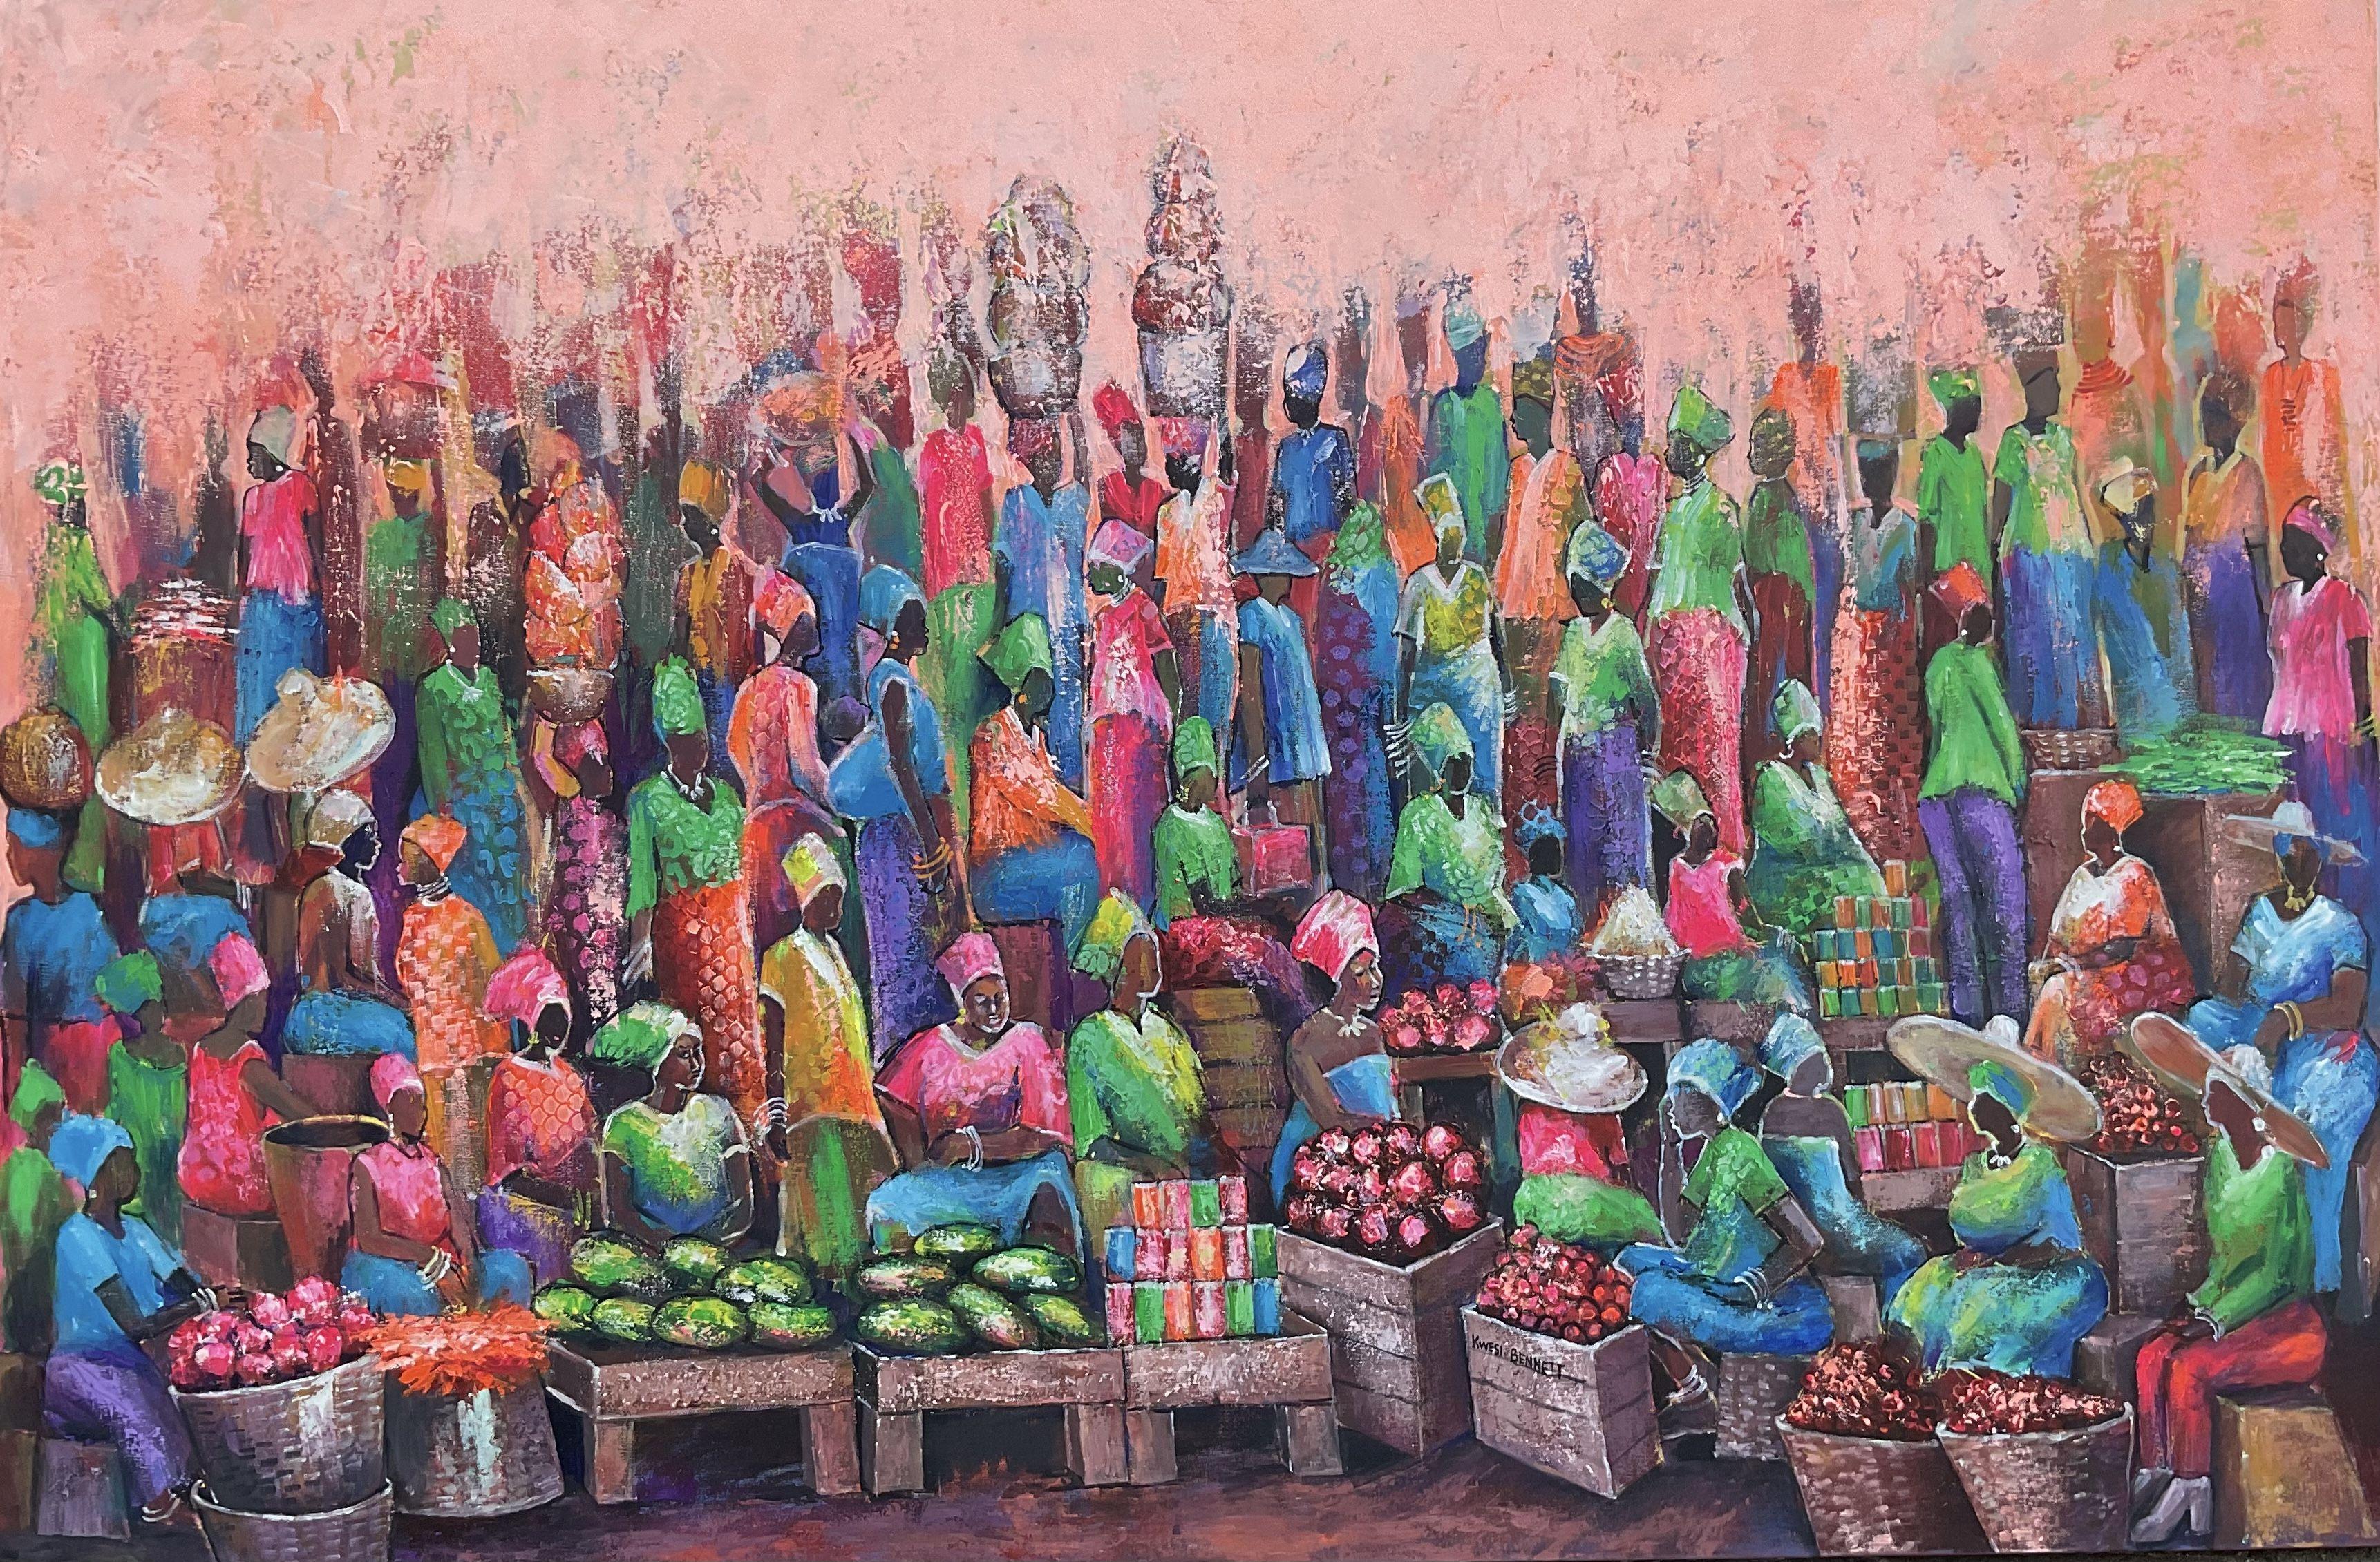 This is a busy market scene in most African countries. While painting, Kwesi Bennettâ€™s interest was not in capturing details, but rather in the movement of the crowd, the mood of the crowd, the individual posture and the variety of colours and